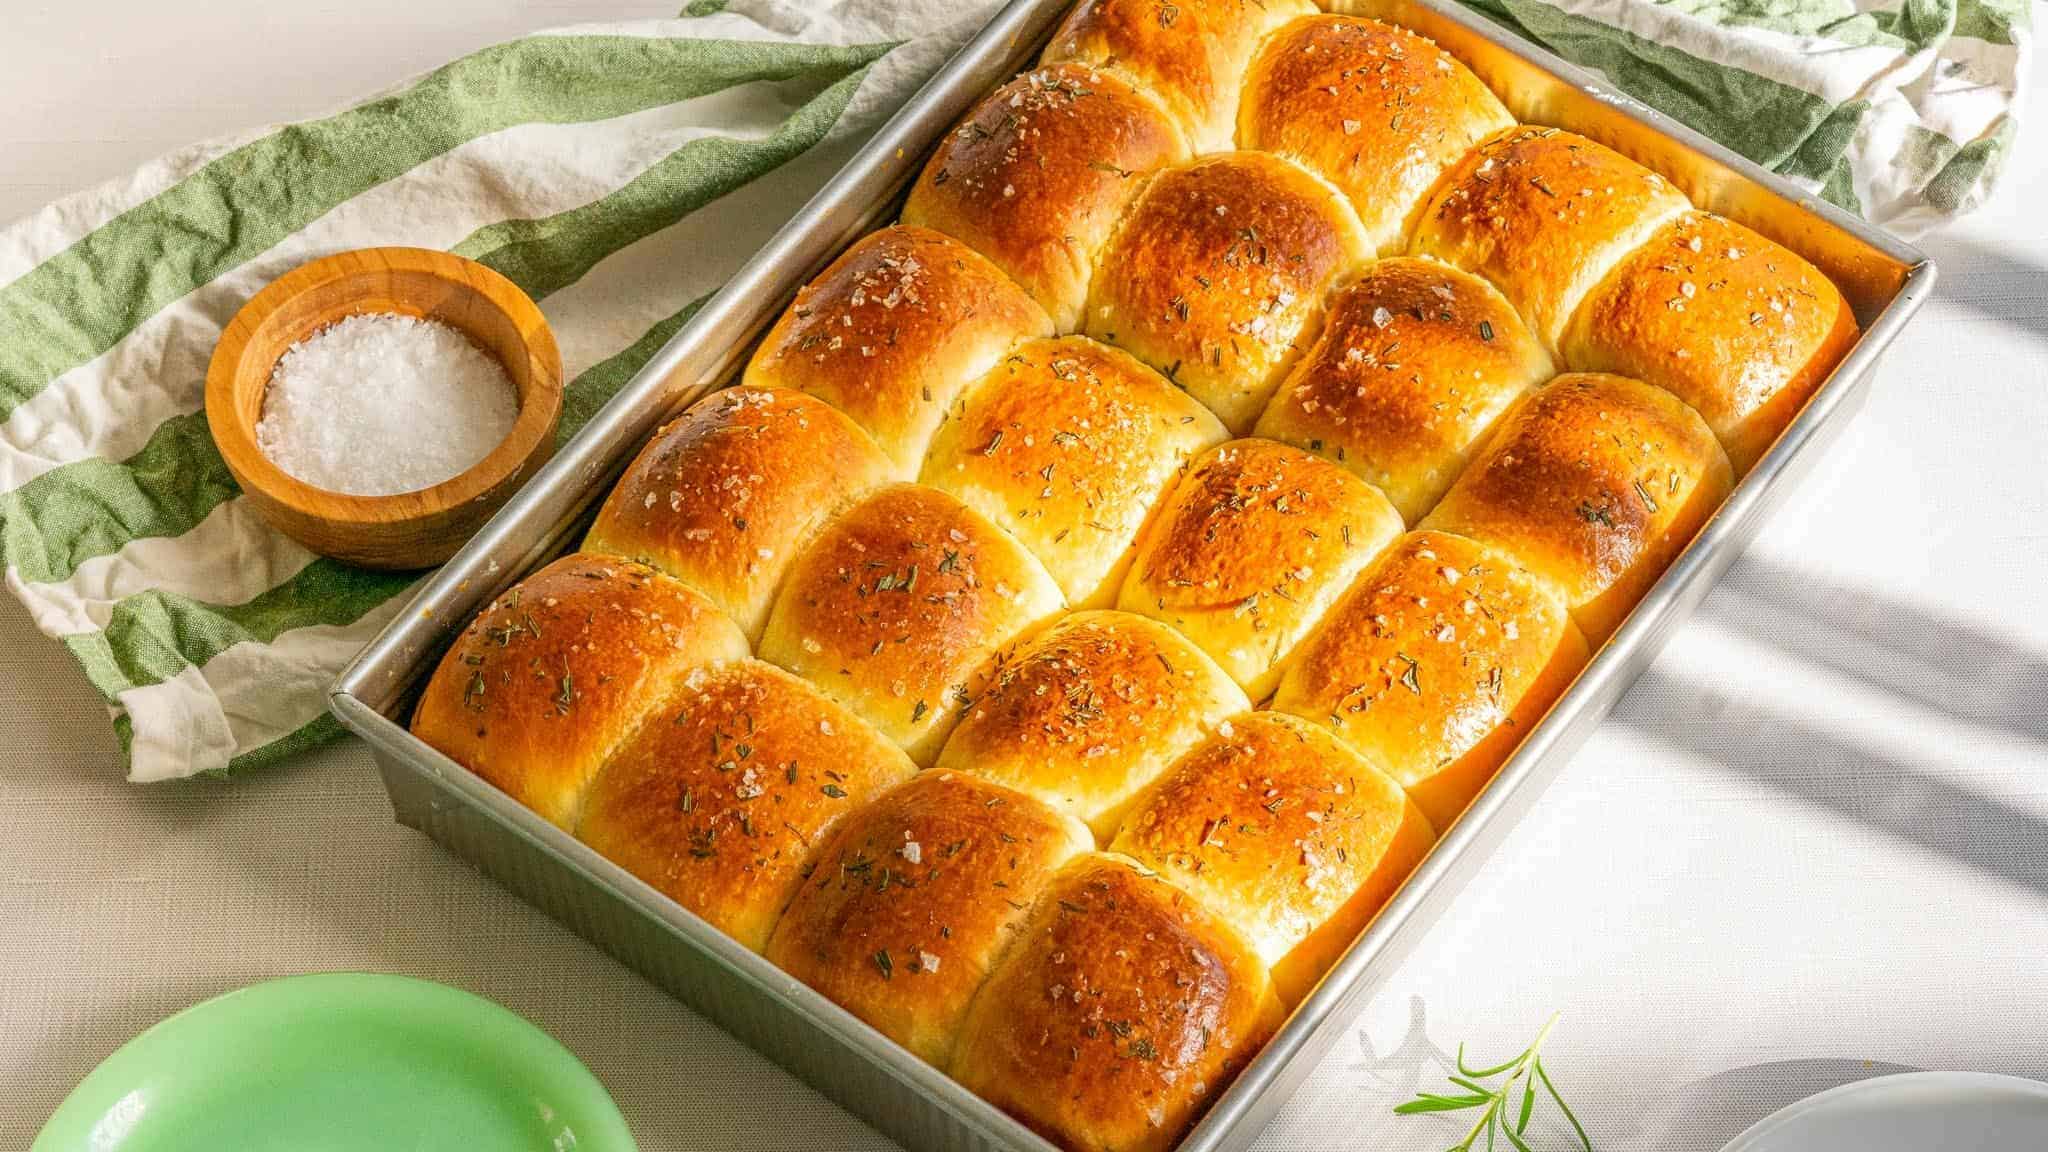 A loaf of bread in a pan on a table.